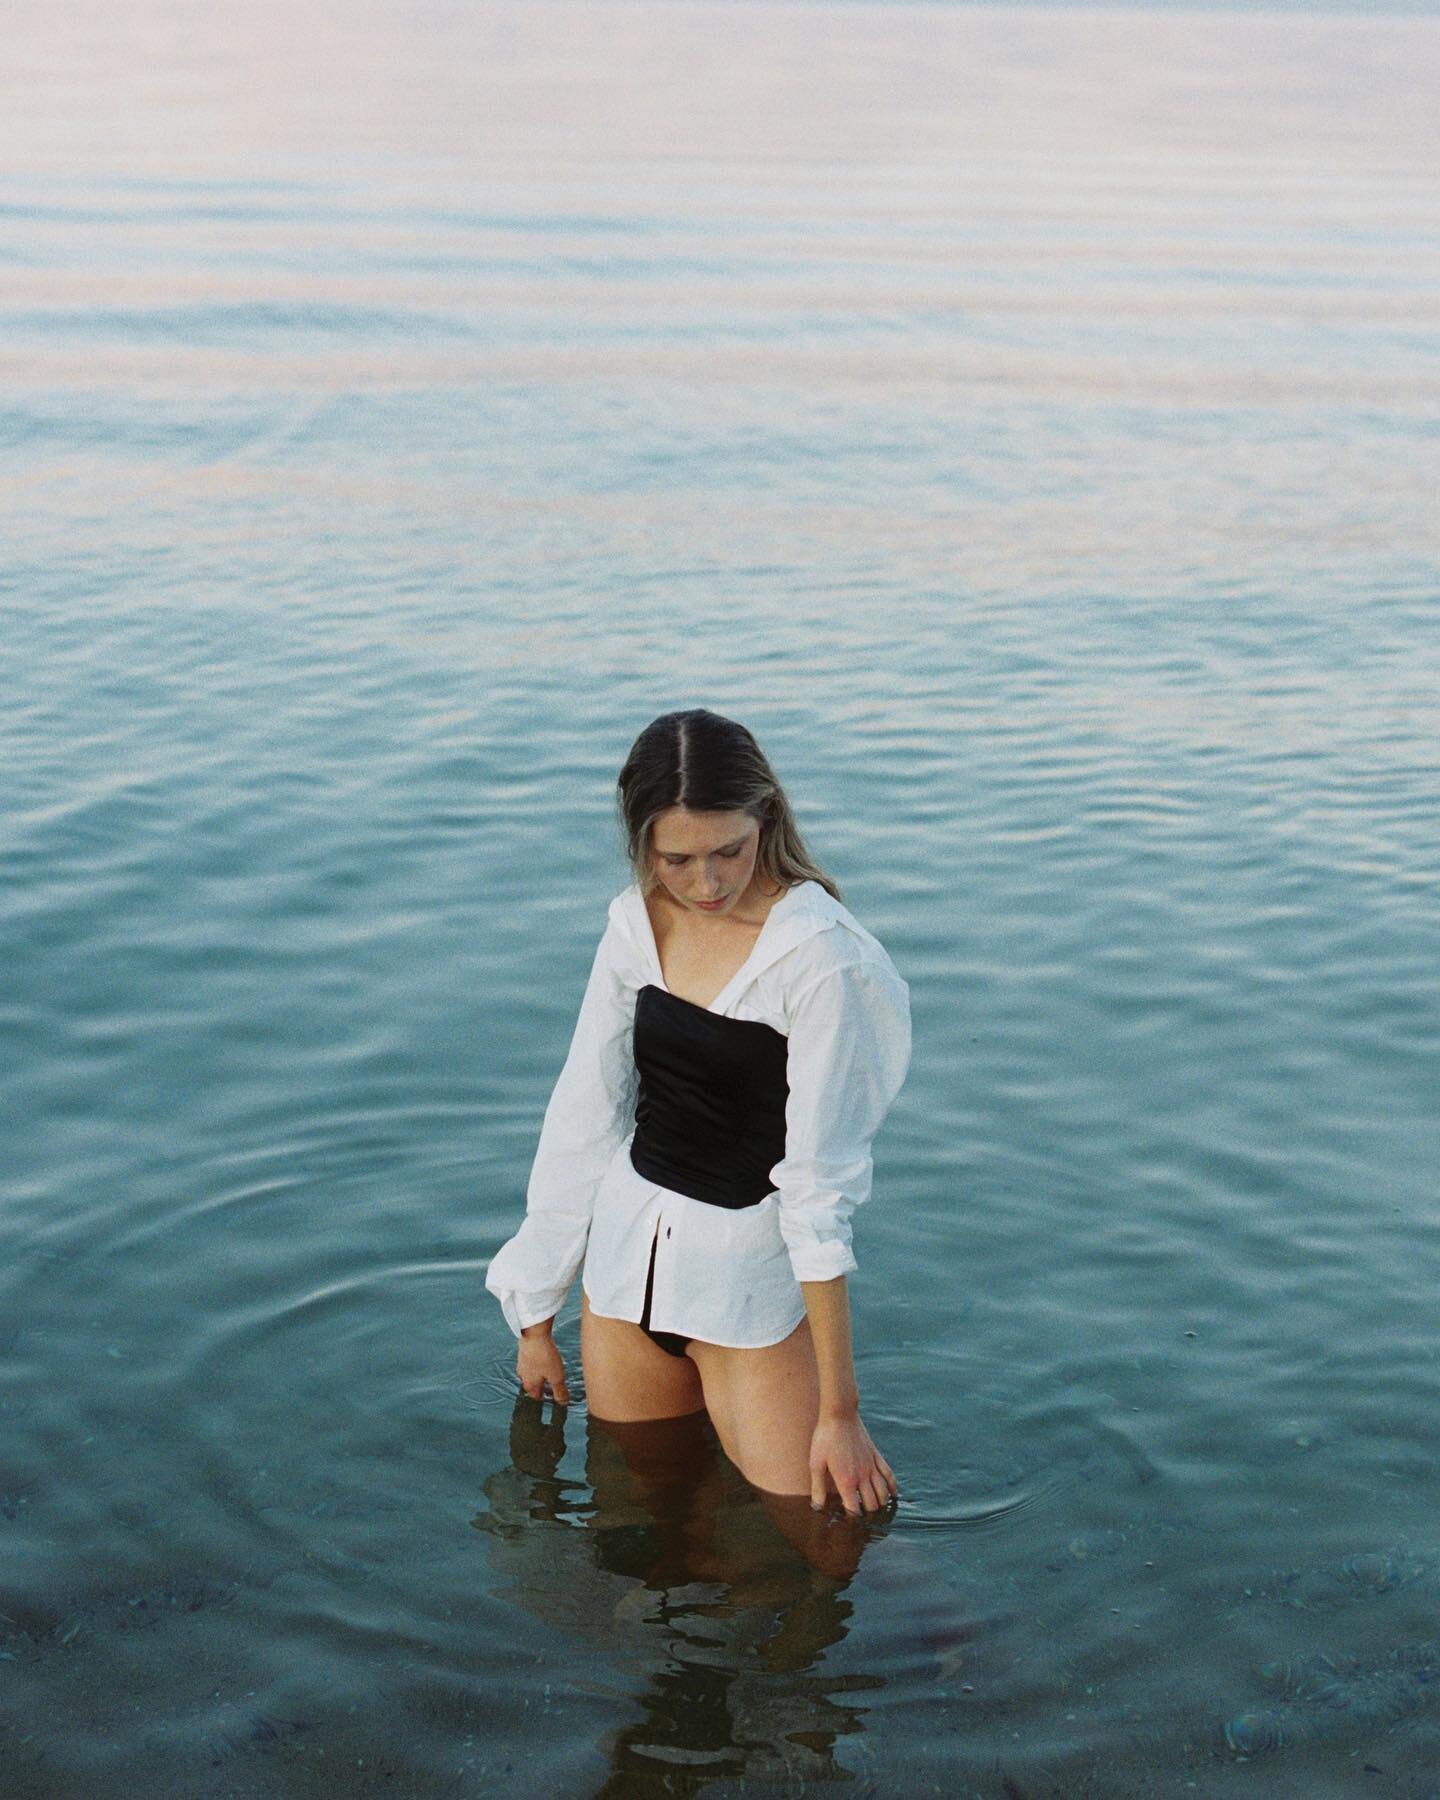 Way back when to water was warm and green and I could afford film 😵😋 
 @edythe.studios 
@henriettad_ 
&bull;
&bull;
&bull;
&bull;
#film #filmfashion #model #melboune #melbournephotographer #melbournemodel #beach #makeup #water #green #shirt #conten